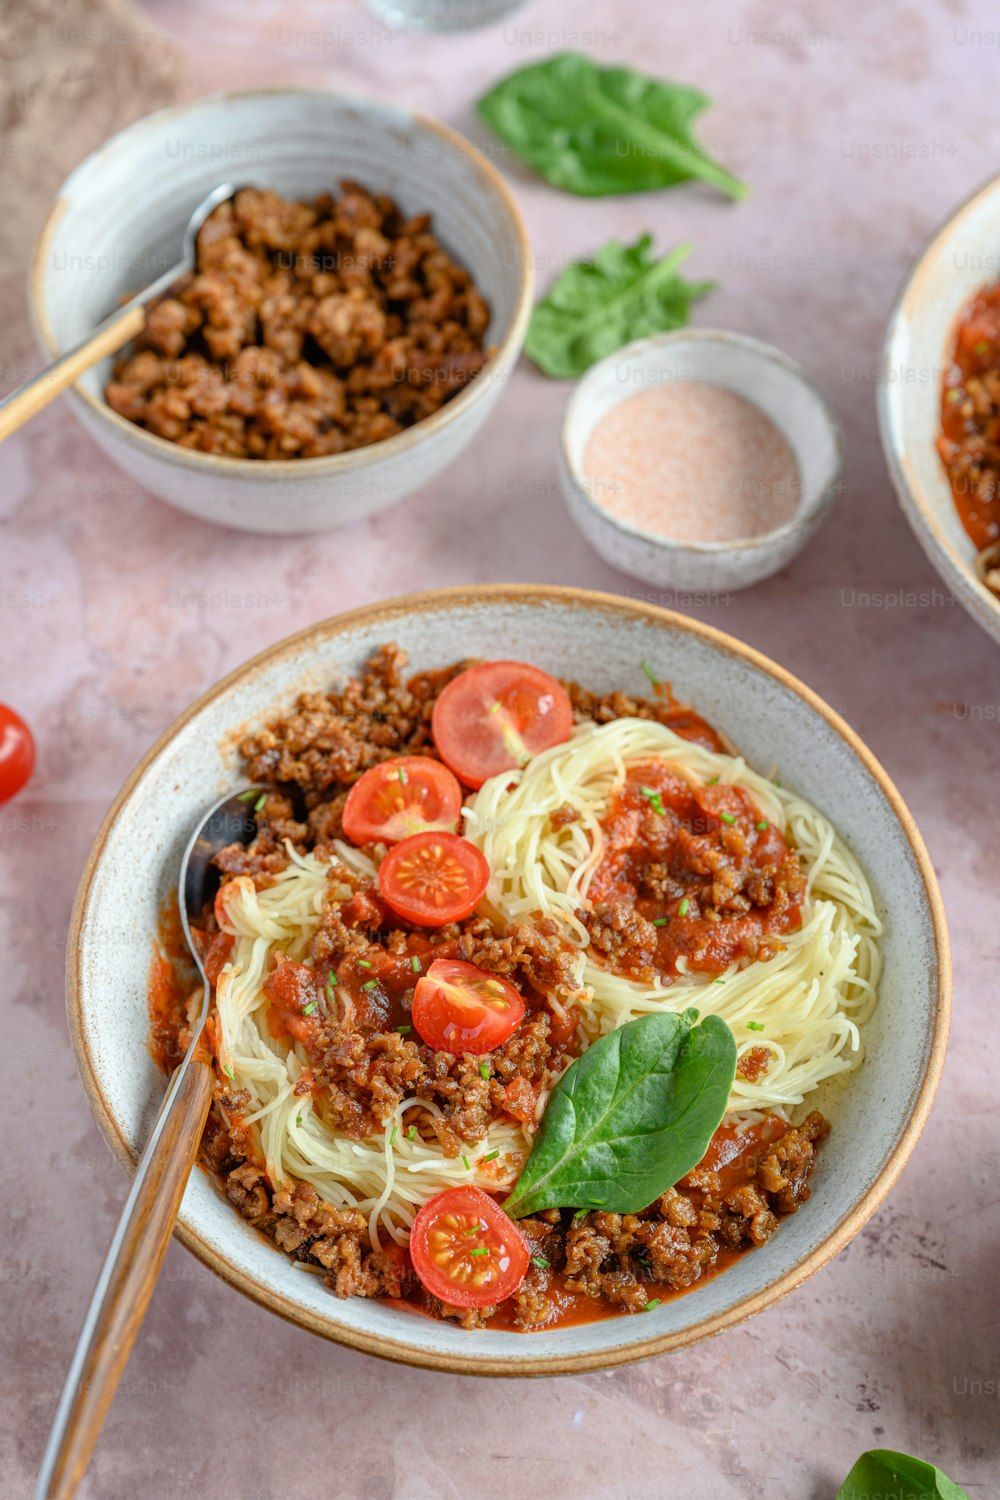 a bowl of spaghetti with meat and tomatoes